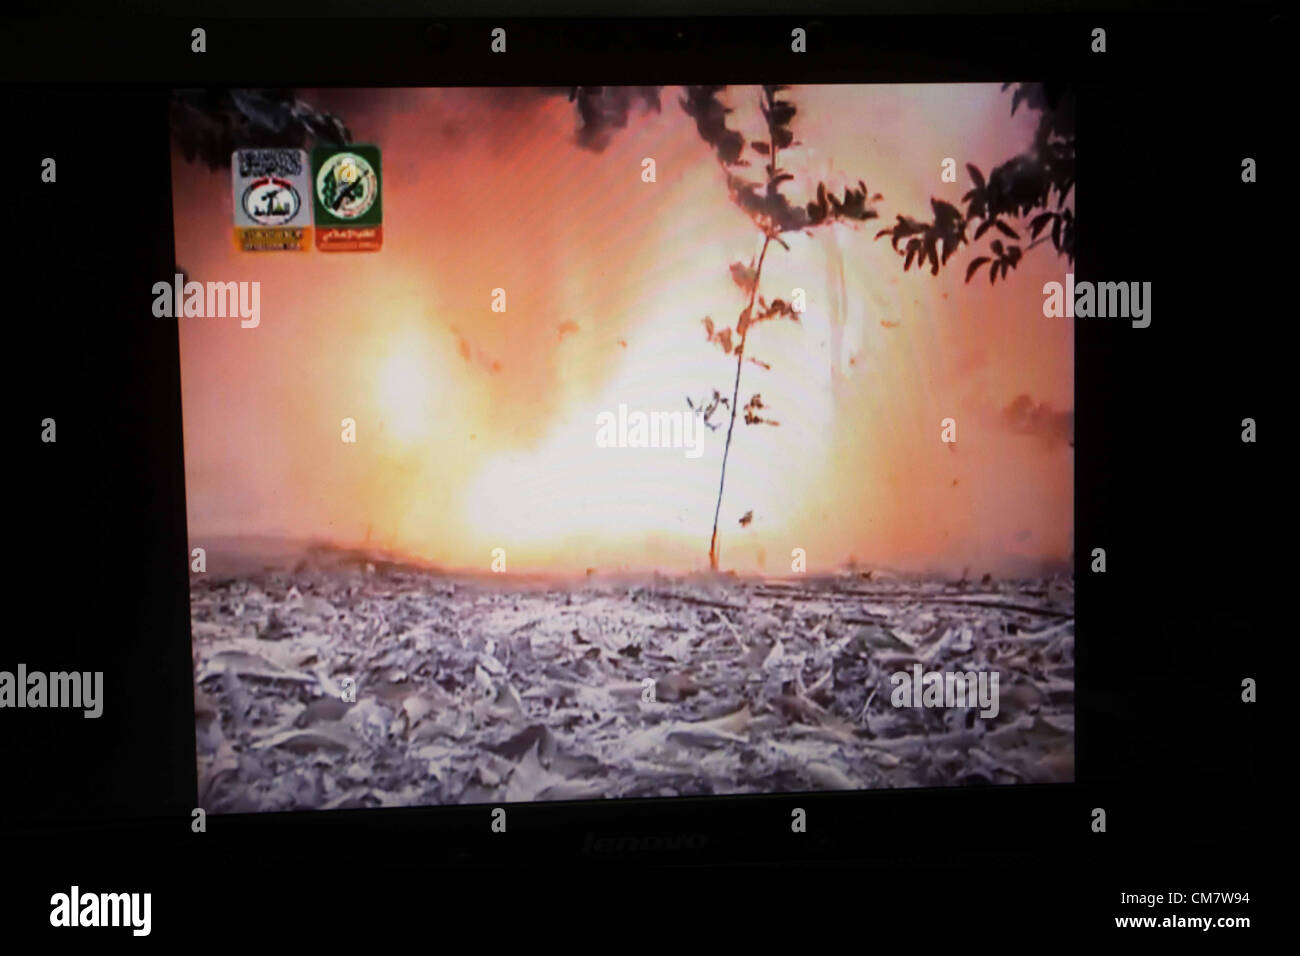 Oct. 24, 2012 - Gaza City, Gaza Strip, Palestinian Territory - A screengrab taken on October 24, 2012 from a video posted on YouTube shows an explosion in Gaza City. Two explosions rocked Gaza City on Wednesday, witnesses said, shortly after Israel killed a gunman in the area citing an escalation of rocket fire at its southern towns and cities  (Credit Image: © Ashraf Amra/APA Images/ZUMAPRESS.com) Stock Photo